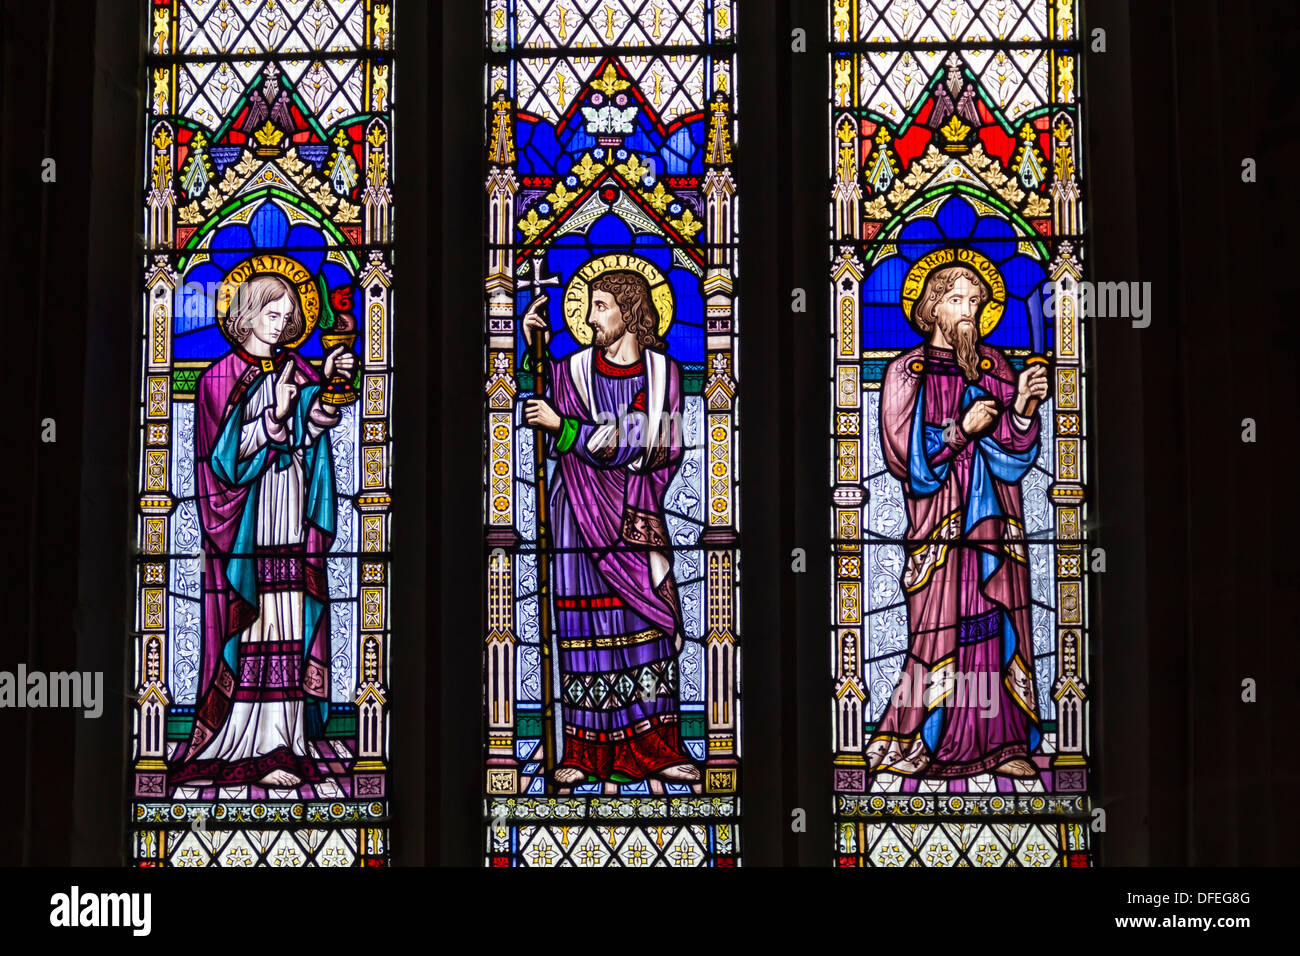 Stained glass window in St Mary Magdalene's Church, Battlefield, Shrewsbury, showing disciples John, Philip and Bartholomew. Stock Photo